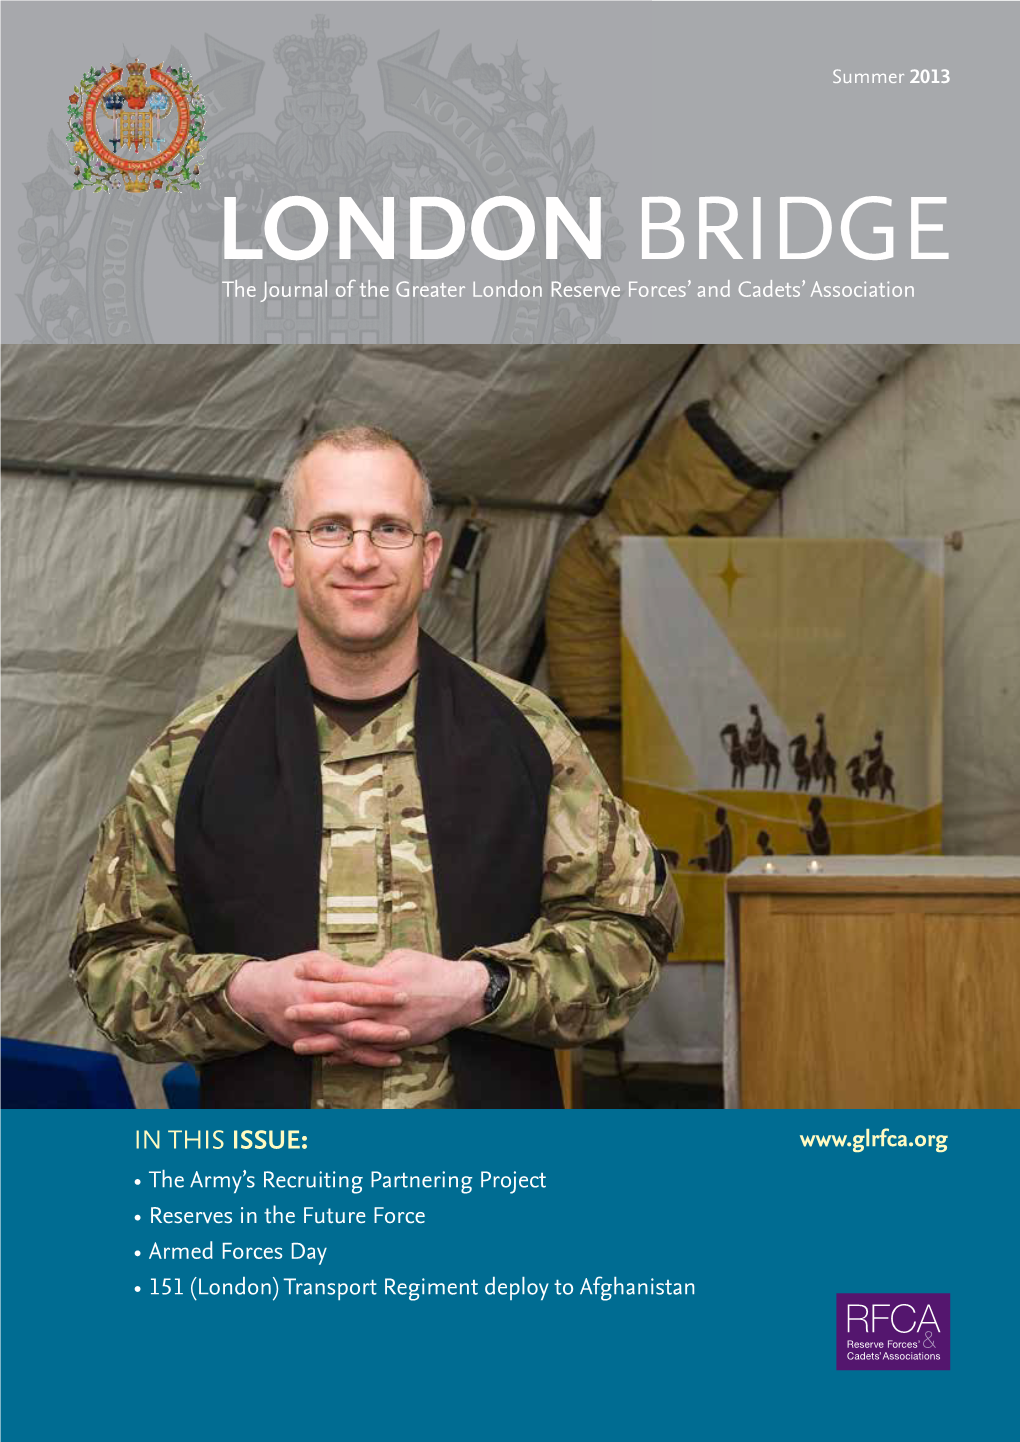 London Bridge the Journal of the Greater London Reserve Forces’ and Cadets’ Association